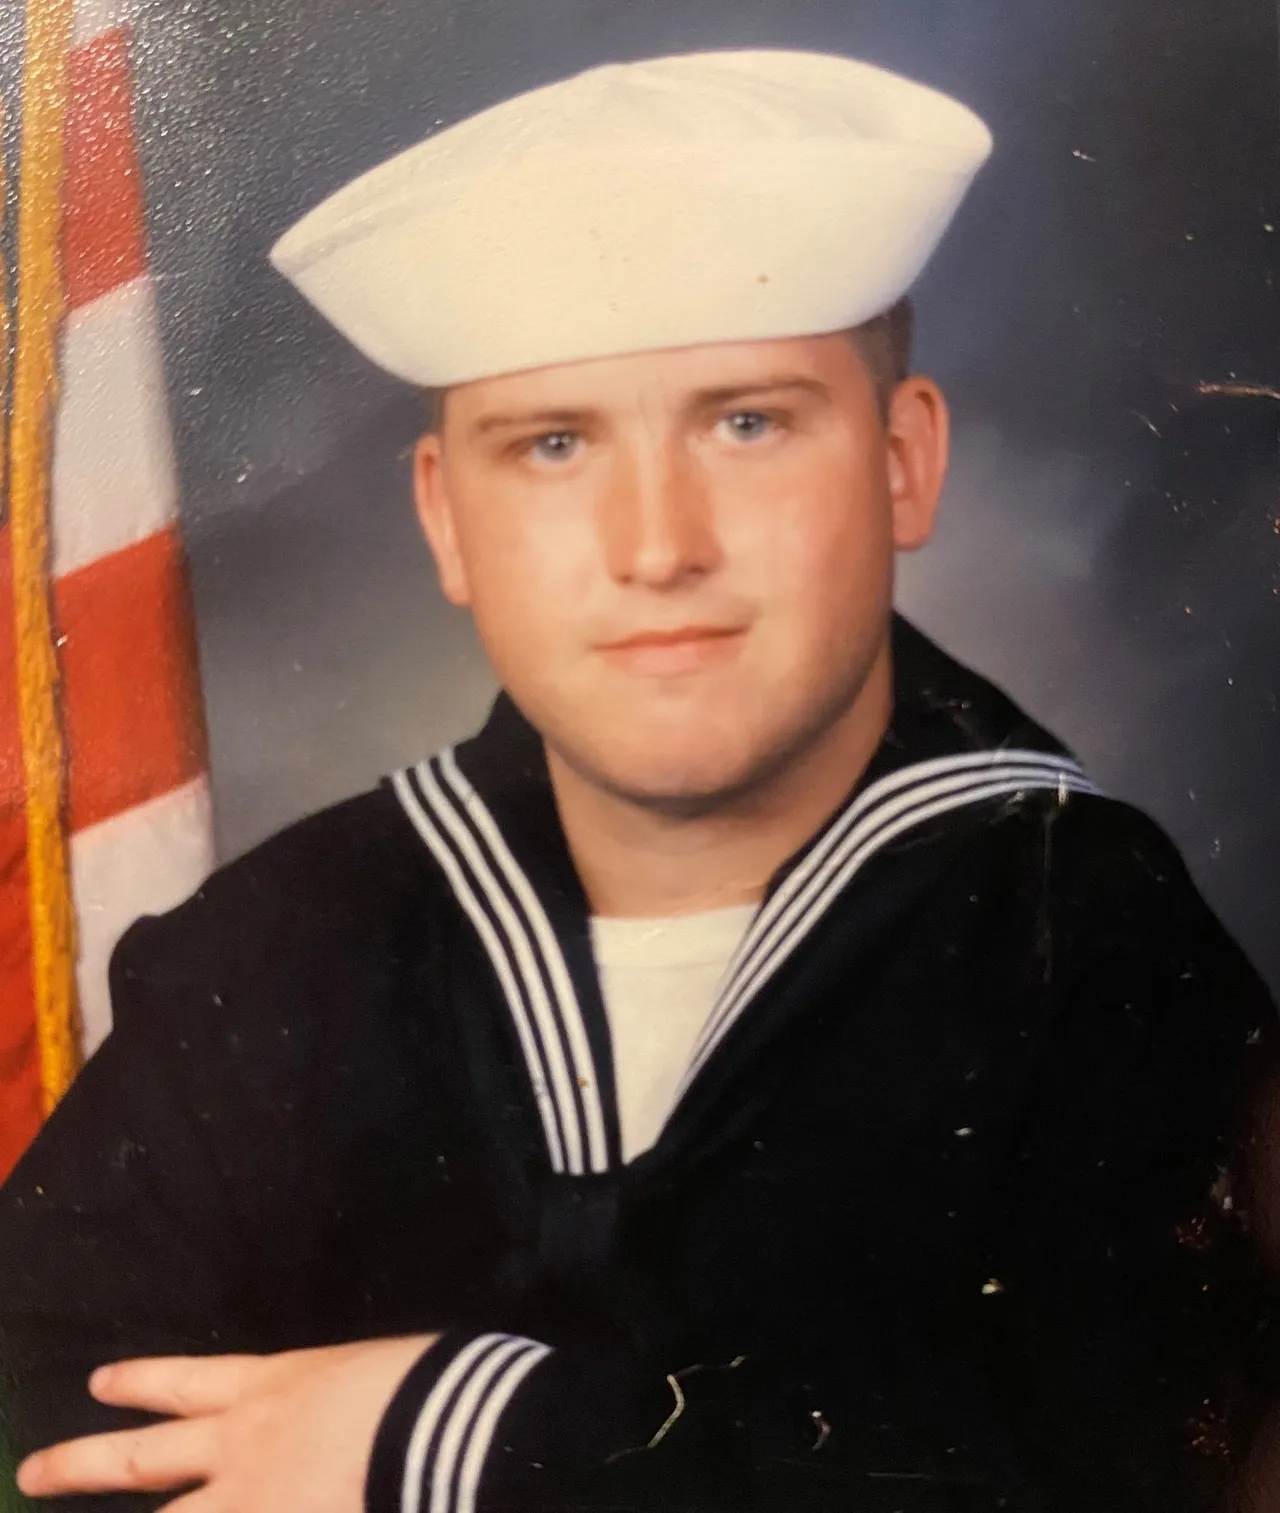 A young Robert Matheny from the navy